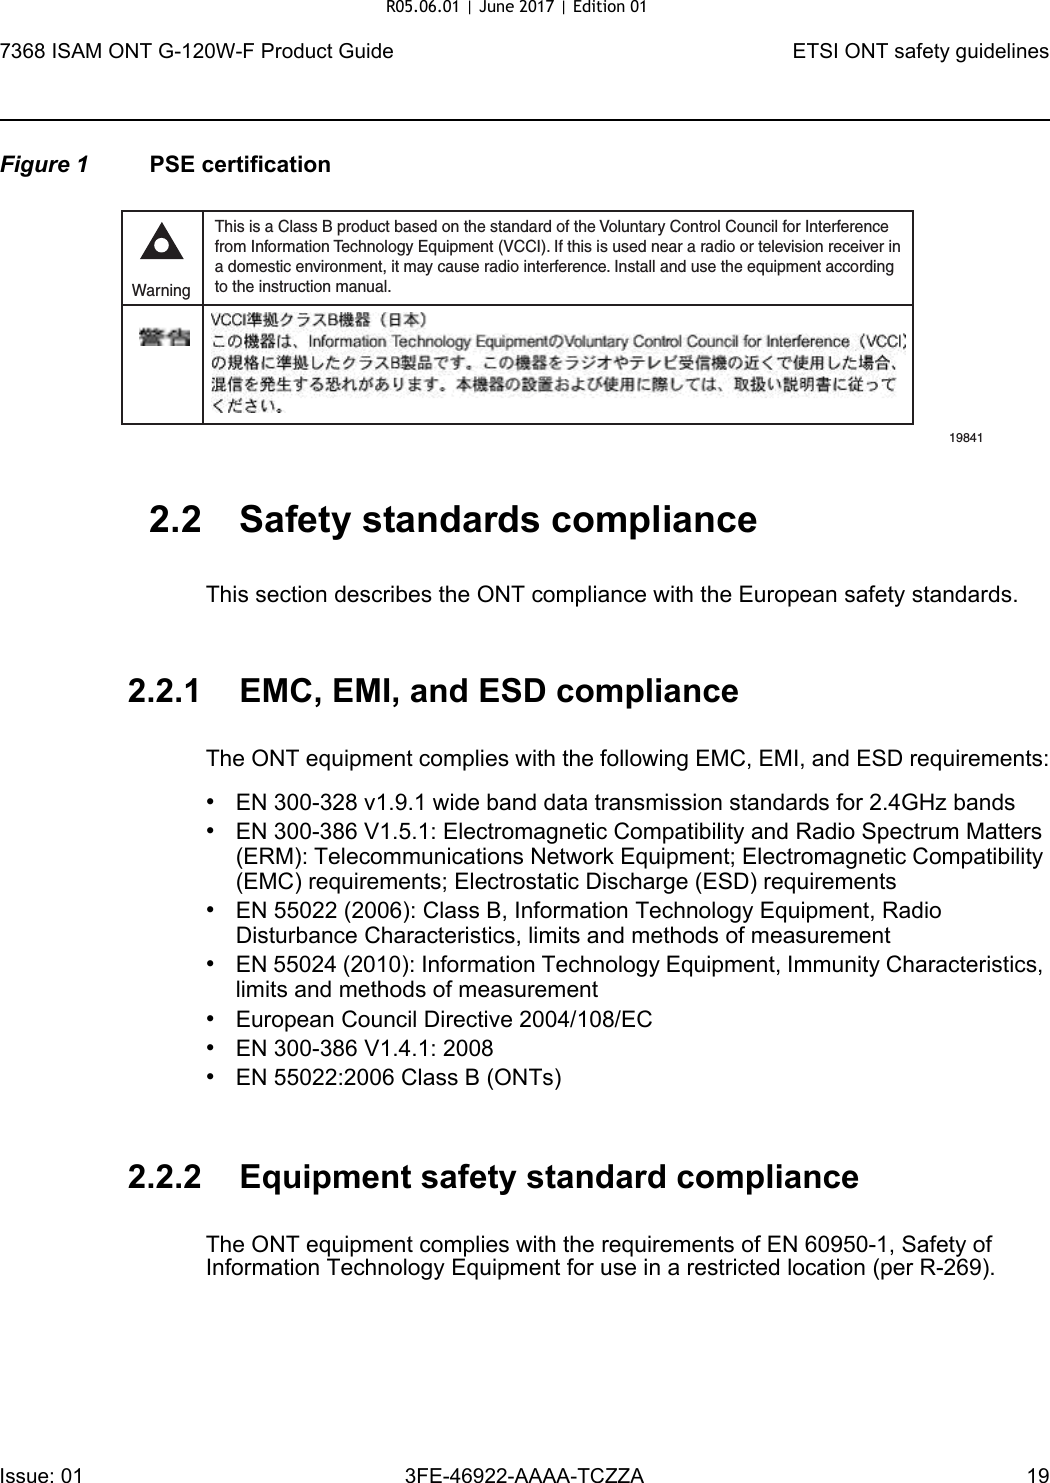 7368 ISAM ONT G-120W-F Product Guide ETSI ONT safety guidelinesIssue: 01 3FE-46922-AAAA-TCZZA 19 Figure 1 PSE certification2.2 Safety standards complianceThis section describes the ONT compliance with the European safety standards.2.2.1 EMC, EMI, and ESD complianceThe ONT equipment complies with the following EMC, EMI, and ESD requirements:•EN 300-328 v1.9.1 wide band data transmission standards for 2.4GHz bands•EN 300-386 V1.5.1: Electromagnetic Compatibility and Radio Spectrum Matters (ERM): Telecommunications Network Equipment; Electromagnetic Compatibility (EMC) requirements; Electrostatic Discharge (ESD) requirements•EN 55022 (2006): Class B, Information Technology Equipment, Radio Disturbance Characteristics, limits and methods of measurement•EN 55024 (2010): Information Technology Equipment, Immunity Characteristics, limits and methods of measurement•European Council Directive 2004/108/EC•EN 300-386 V1.4.1: 2008•EN 55022:2006 Class B (ONTs)2.2.2 Equipment safety standard complianceThe ONT equipment complies with the requirements of EN 60950-1, Safety of Information Technology Equipment for use in a restricted location (per R-269).This is a Class B product based on the standard of the Voluntary Control Council for Interferencefrom Information Technology Equipment (VCCI). If this is used near a radio or television receiver ina domestic environment, it may cause radio interference. Install and use the equipment accordingto the instruction manual. Warning19841R05.06.01 | June 2017 | Edition 01 